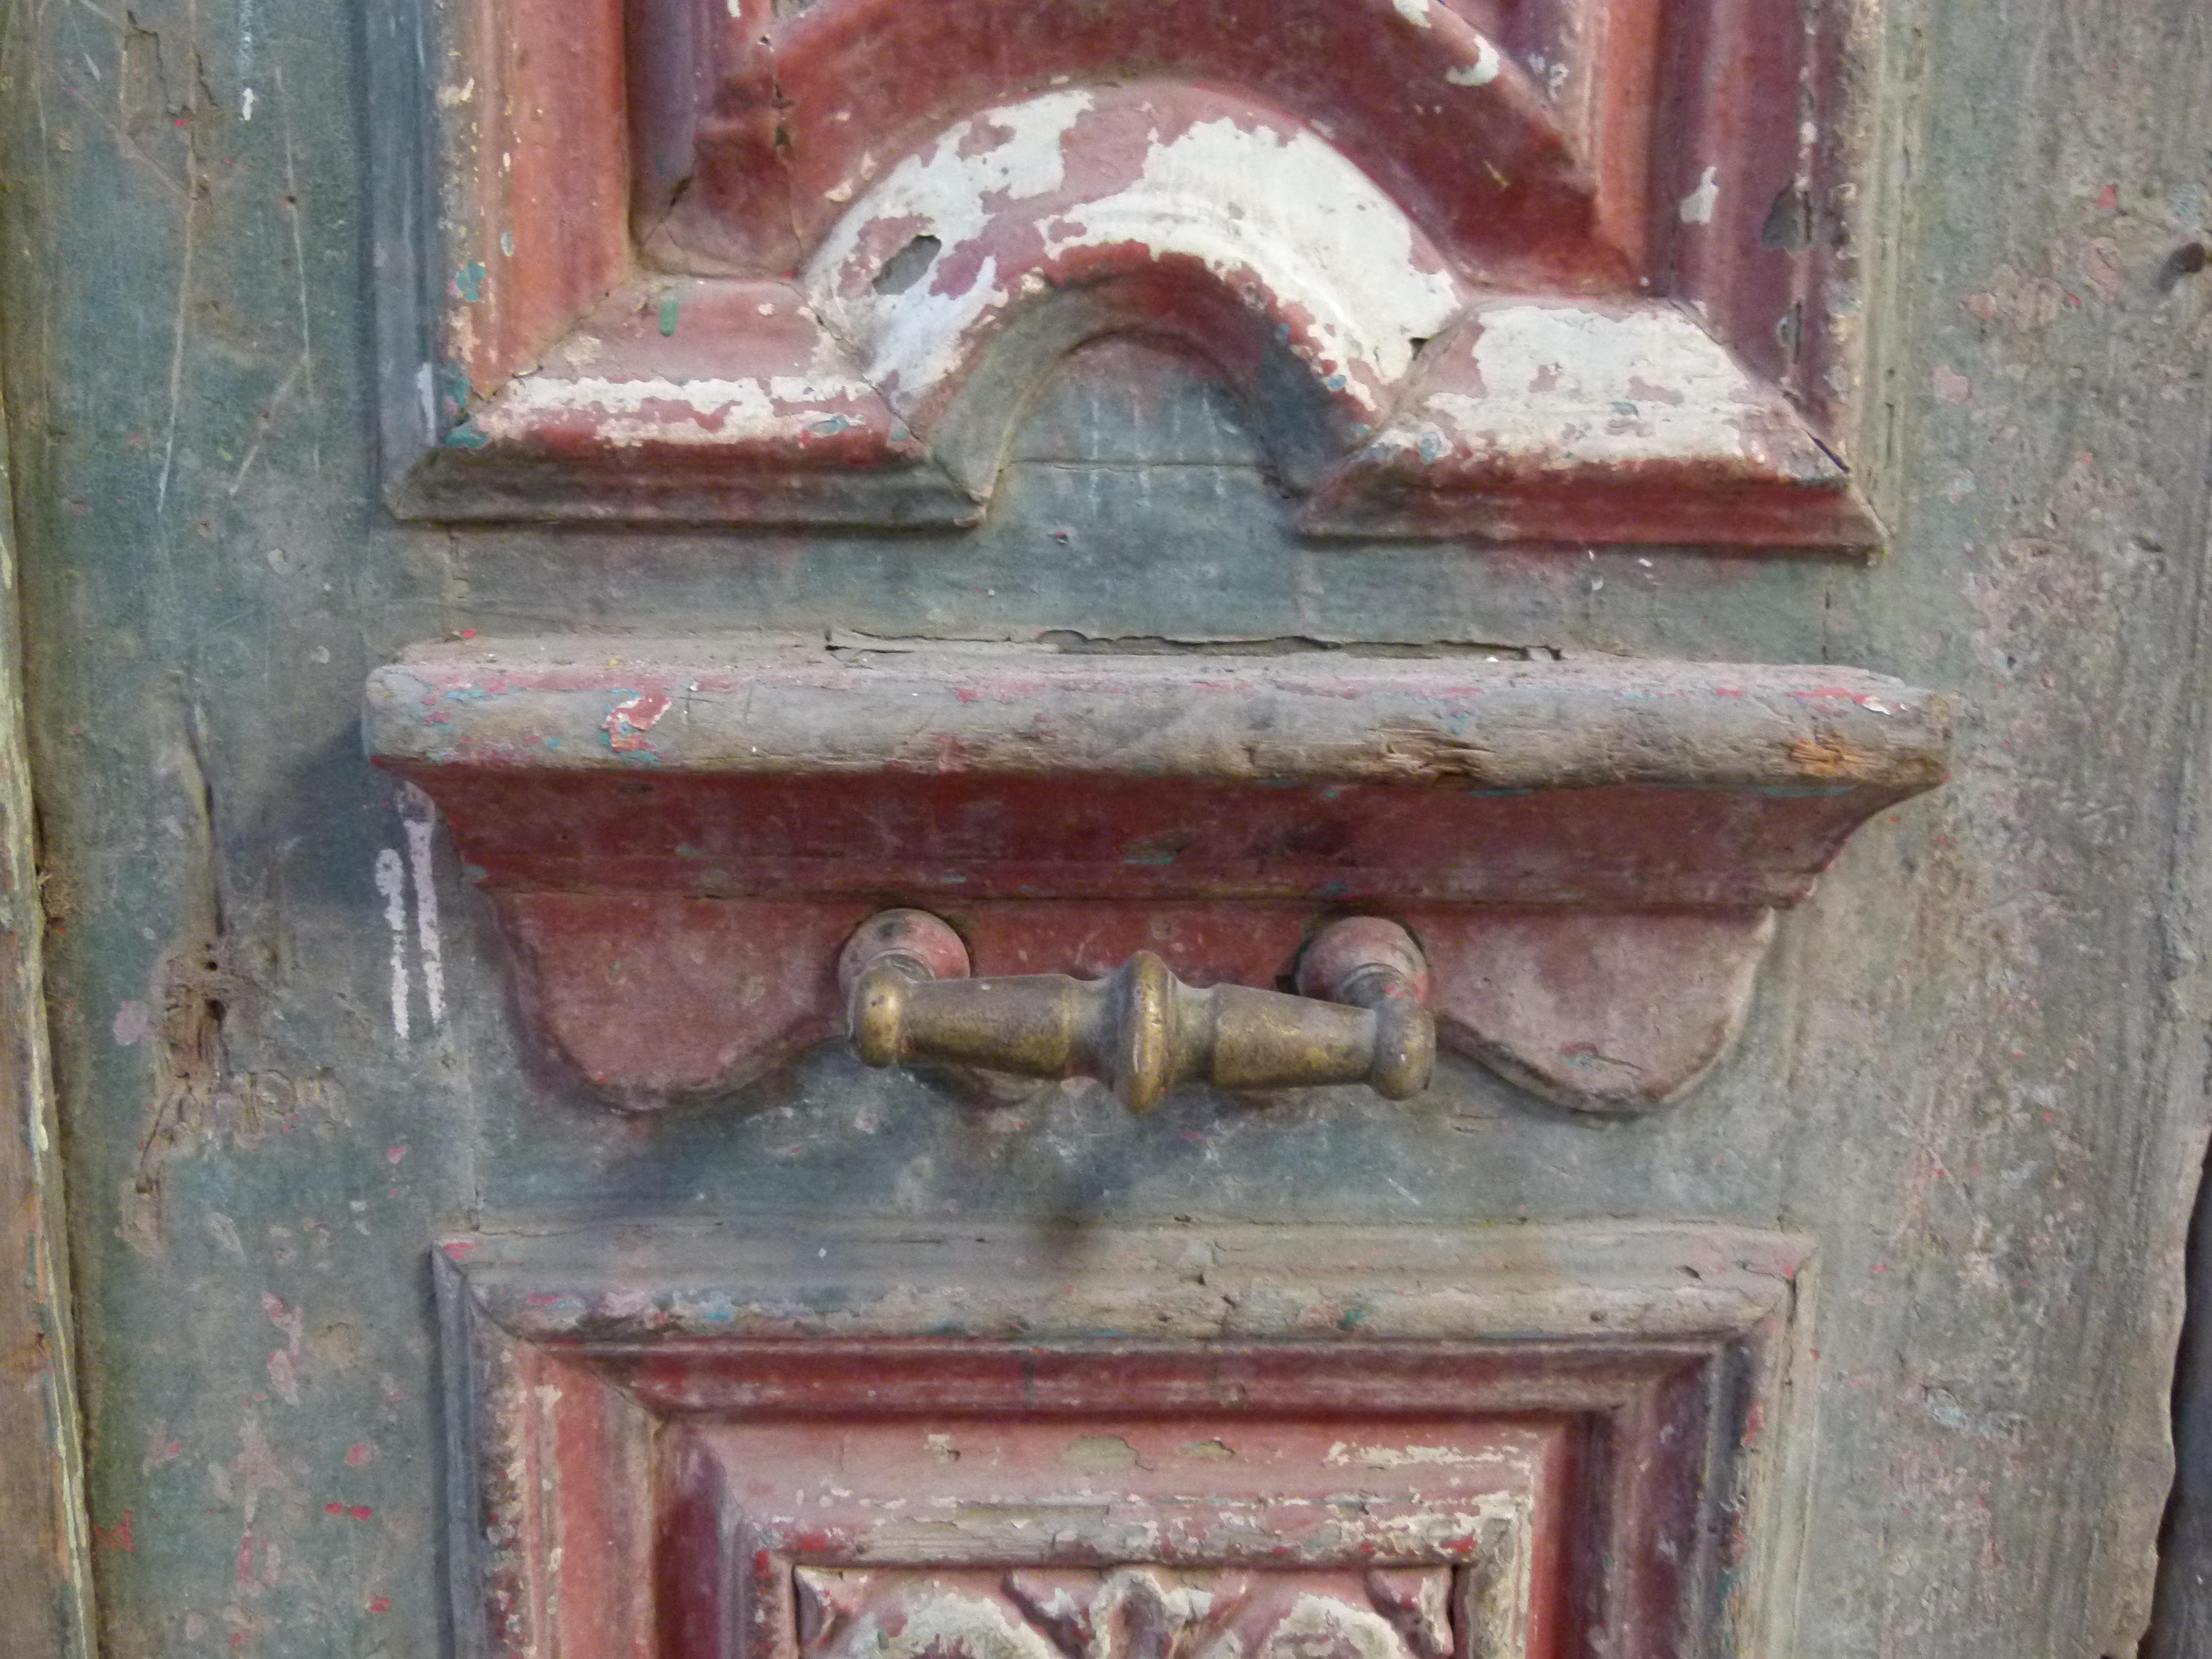 19th Century Wooden Double Front Door in Art Nouveau Style For Sale